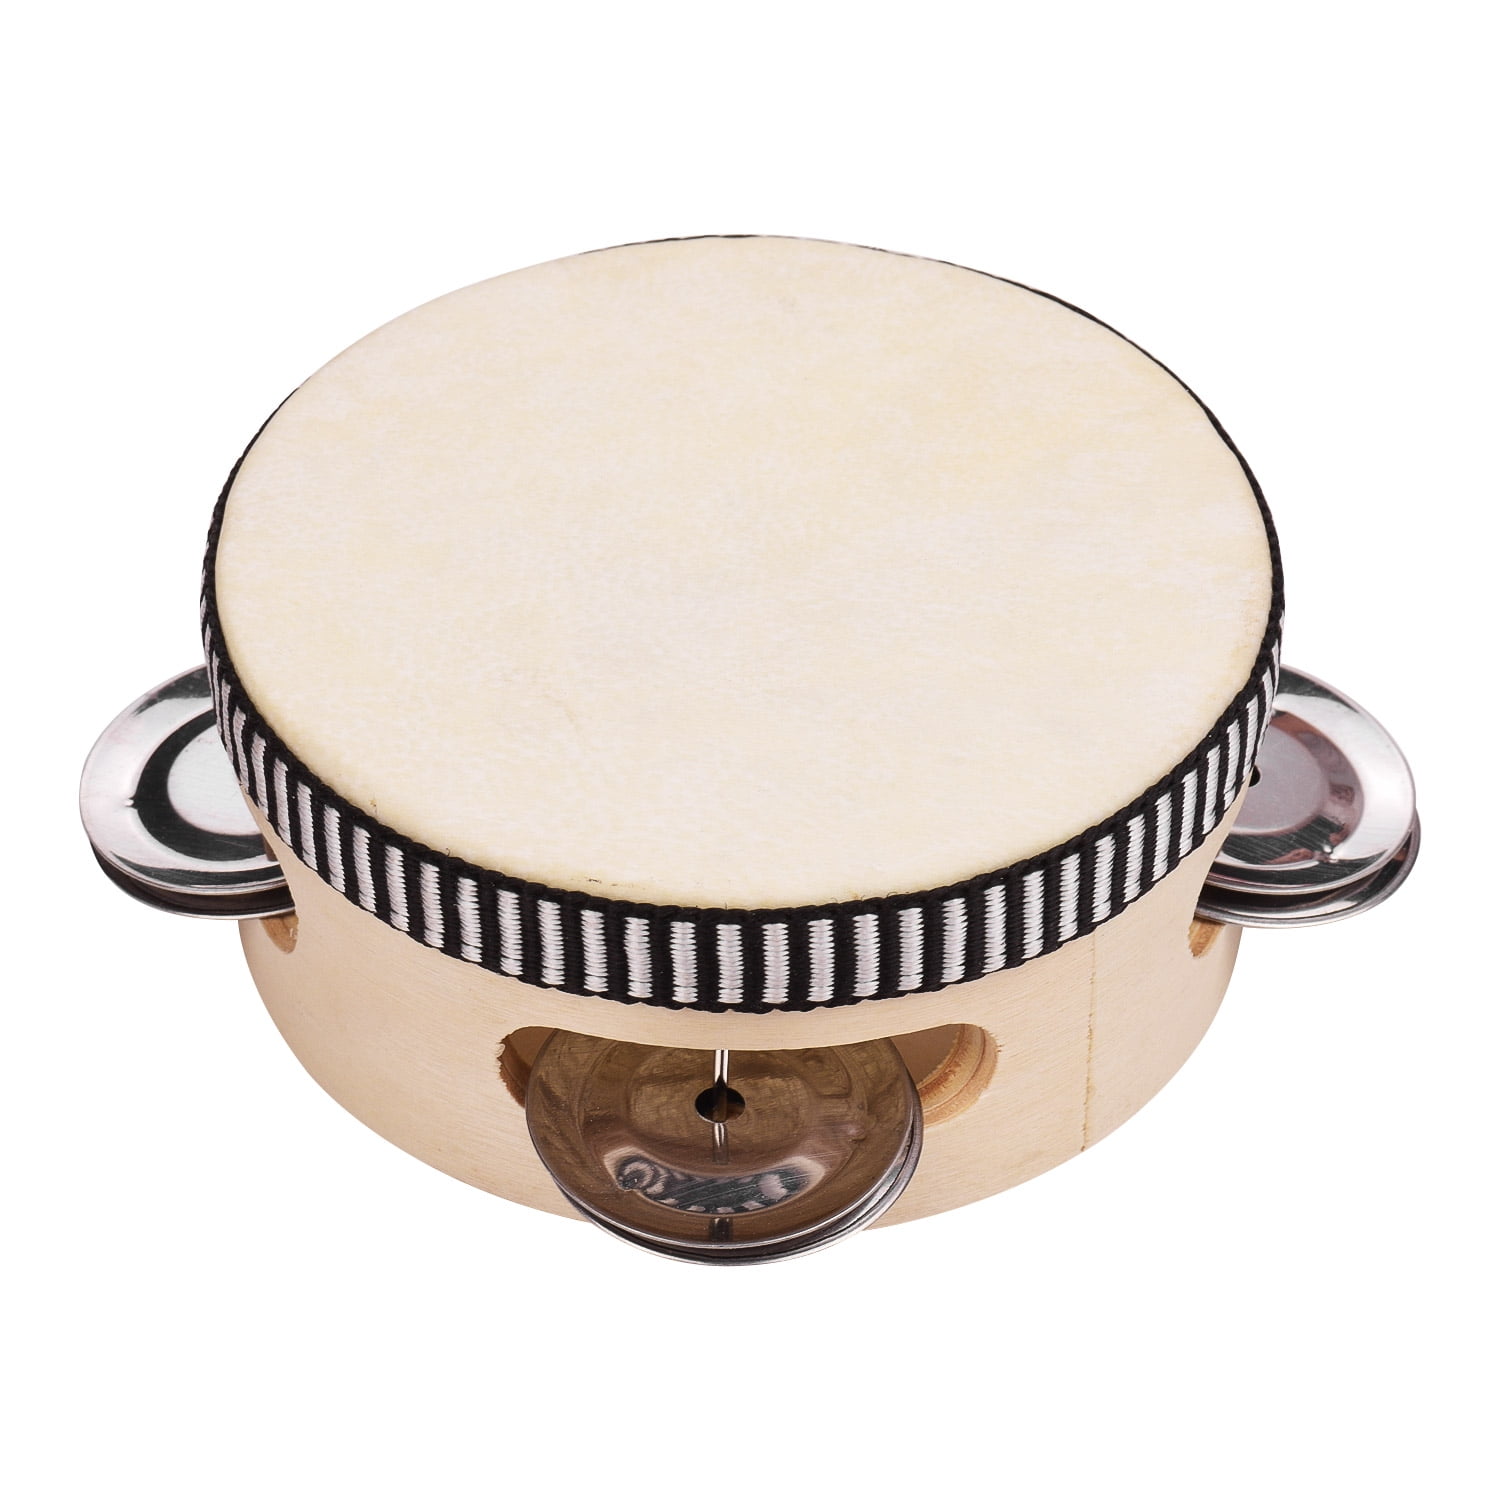 Natural Head Educational Musical Instrument Traditional Single Jingle Bell Row A-Star 10 inch Handheld Headed Tambourine 